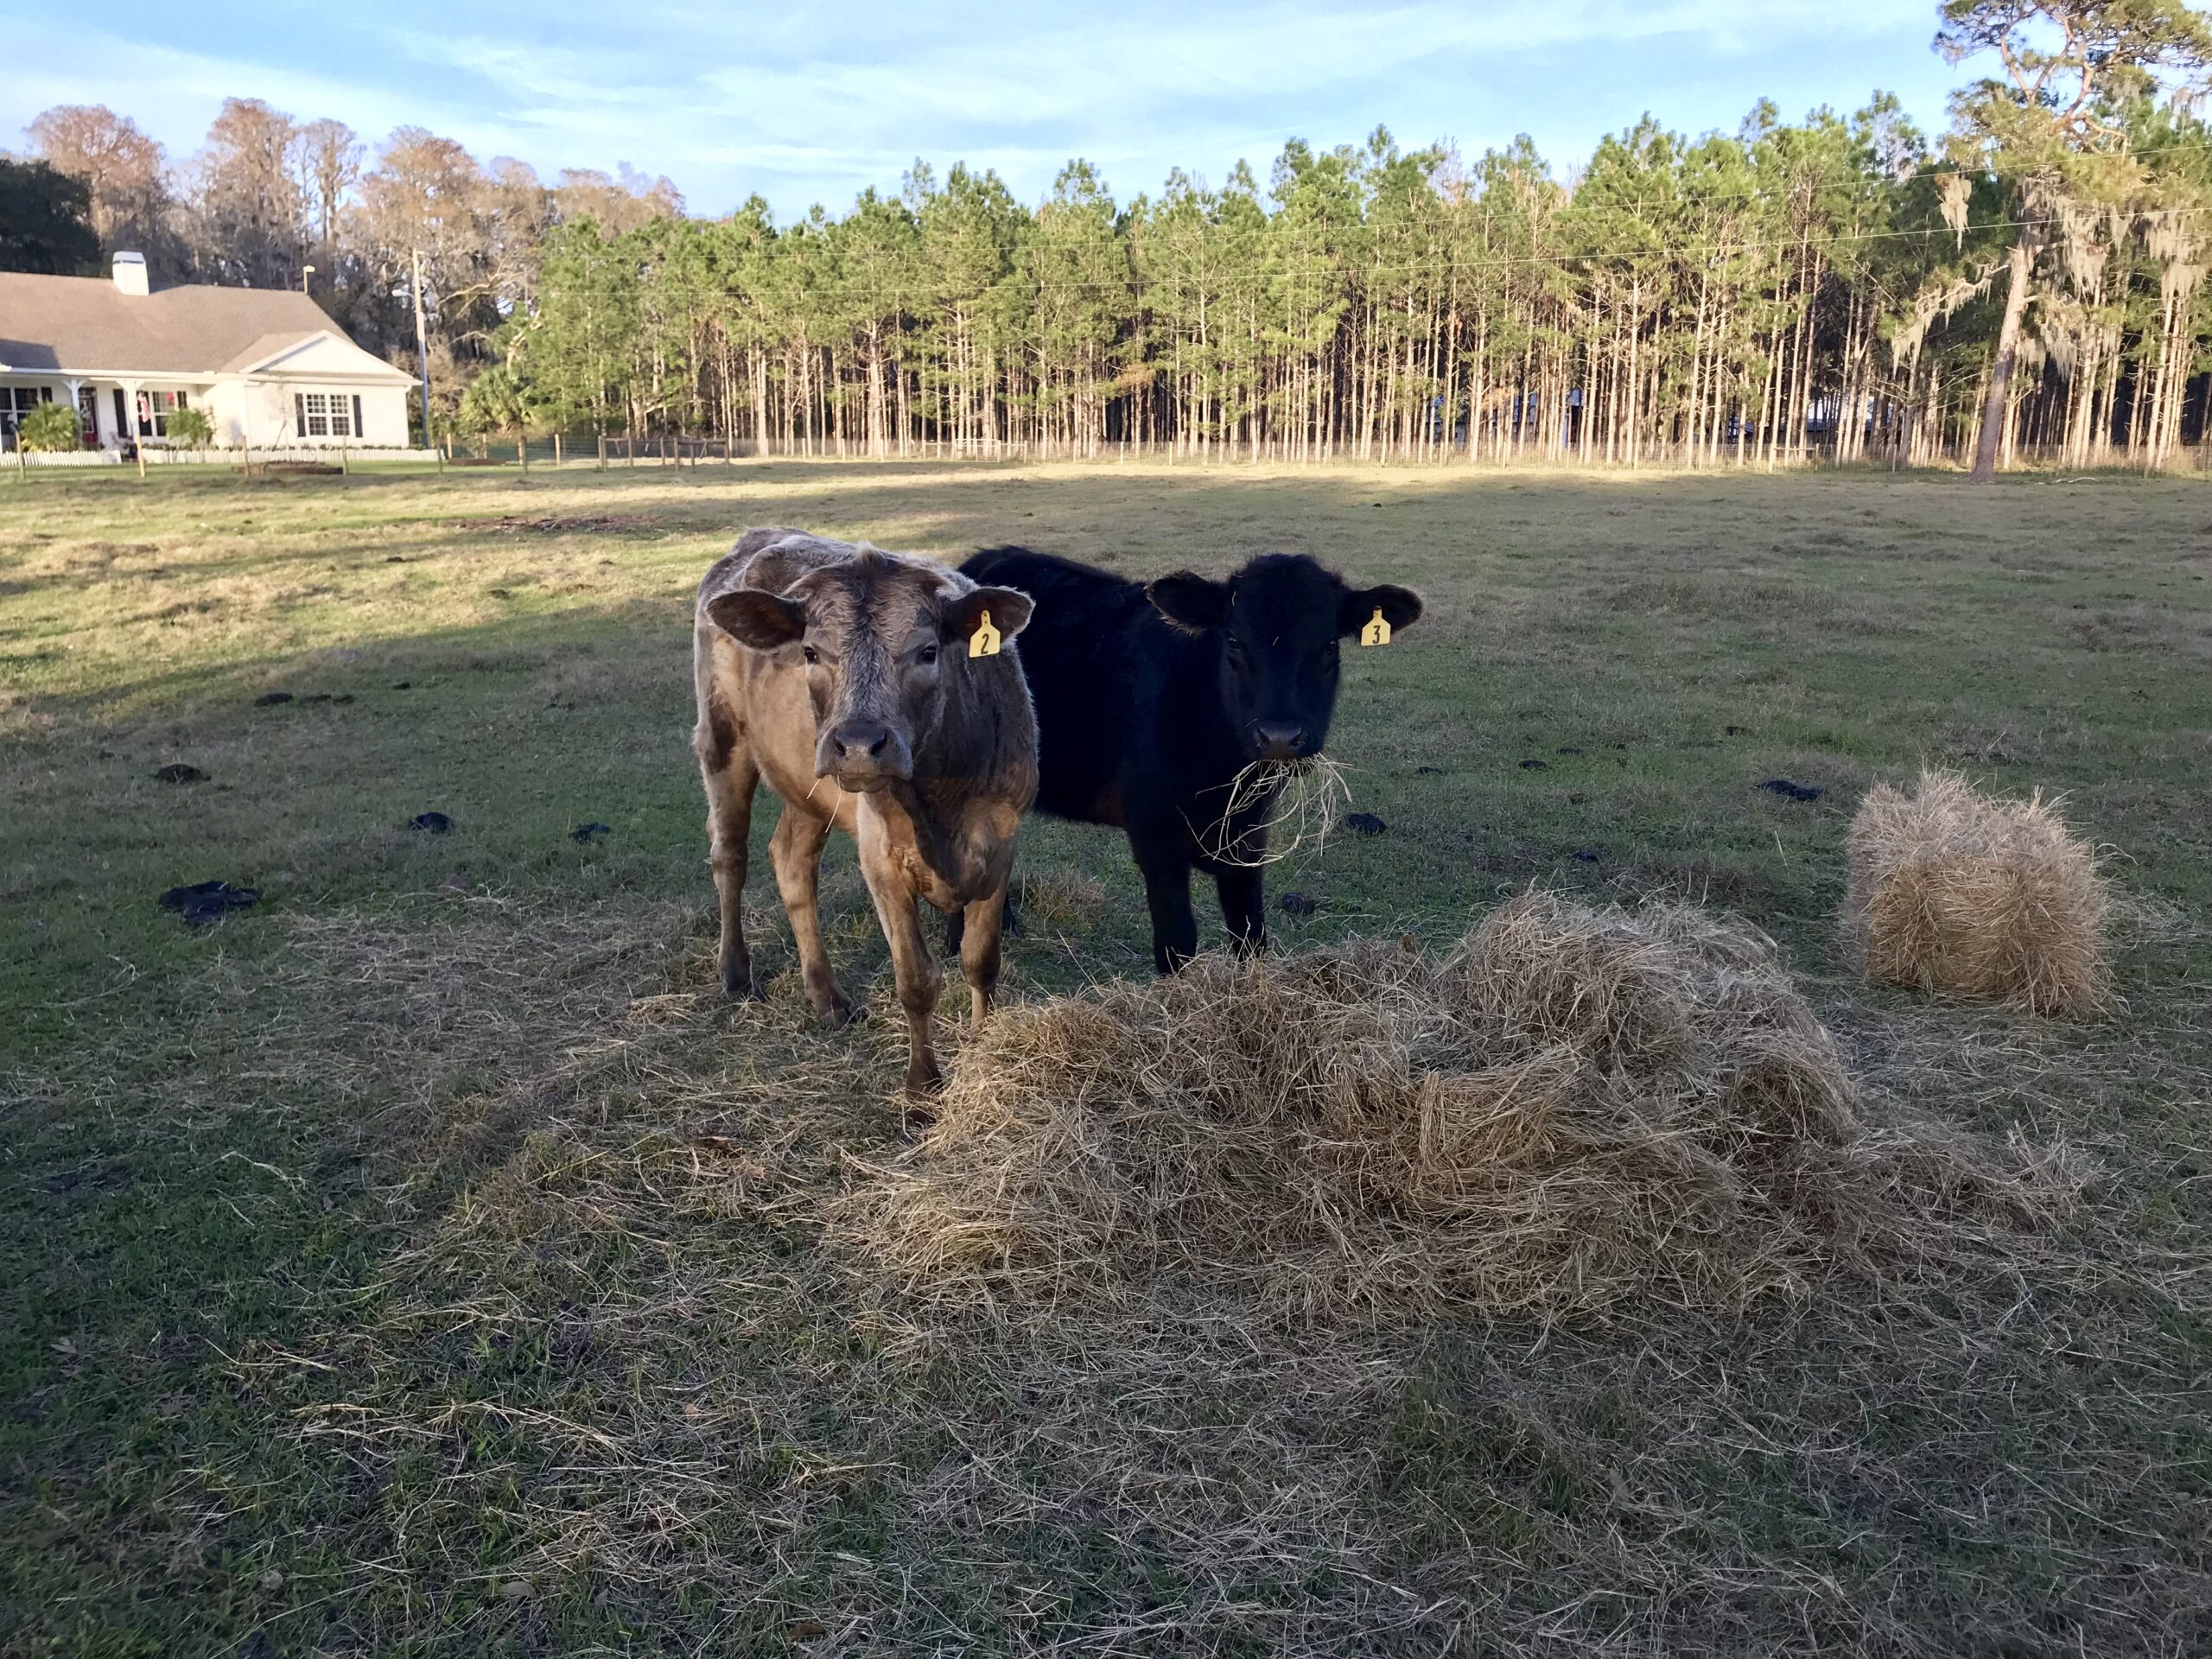 Motivational Monday:  “Hay”, y’all…taste and see.